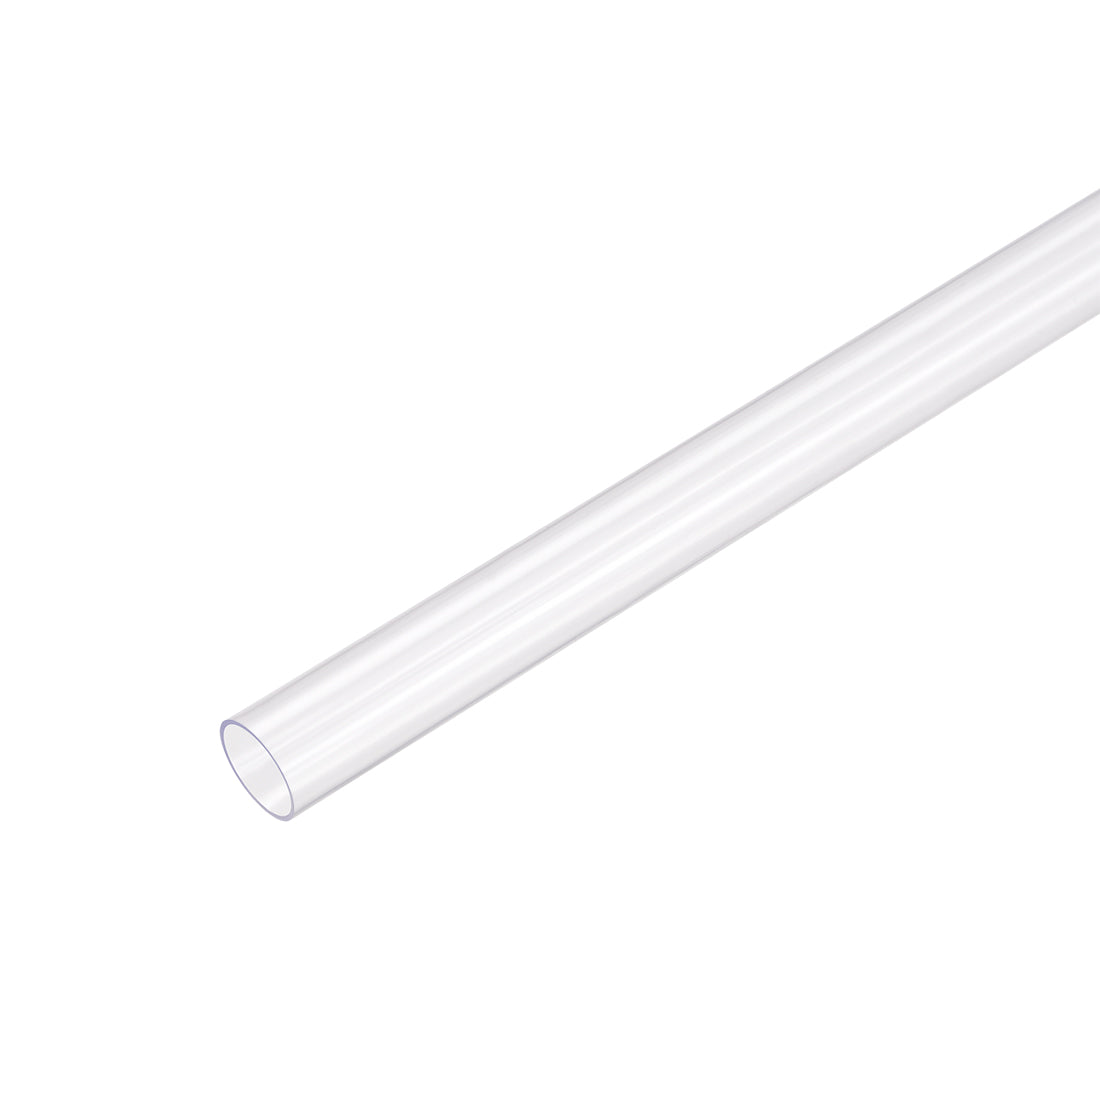 uxcell Uxcell PVC Rigid Round Tubing,Clear,9mm ID x 10mm OD,0.5M/1.64Ft Length,3pcs